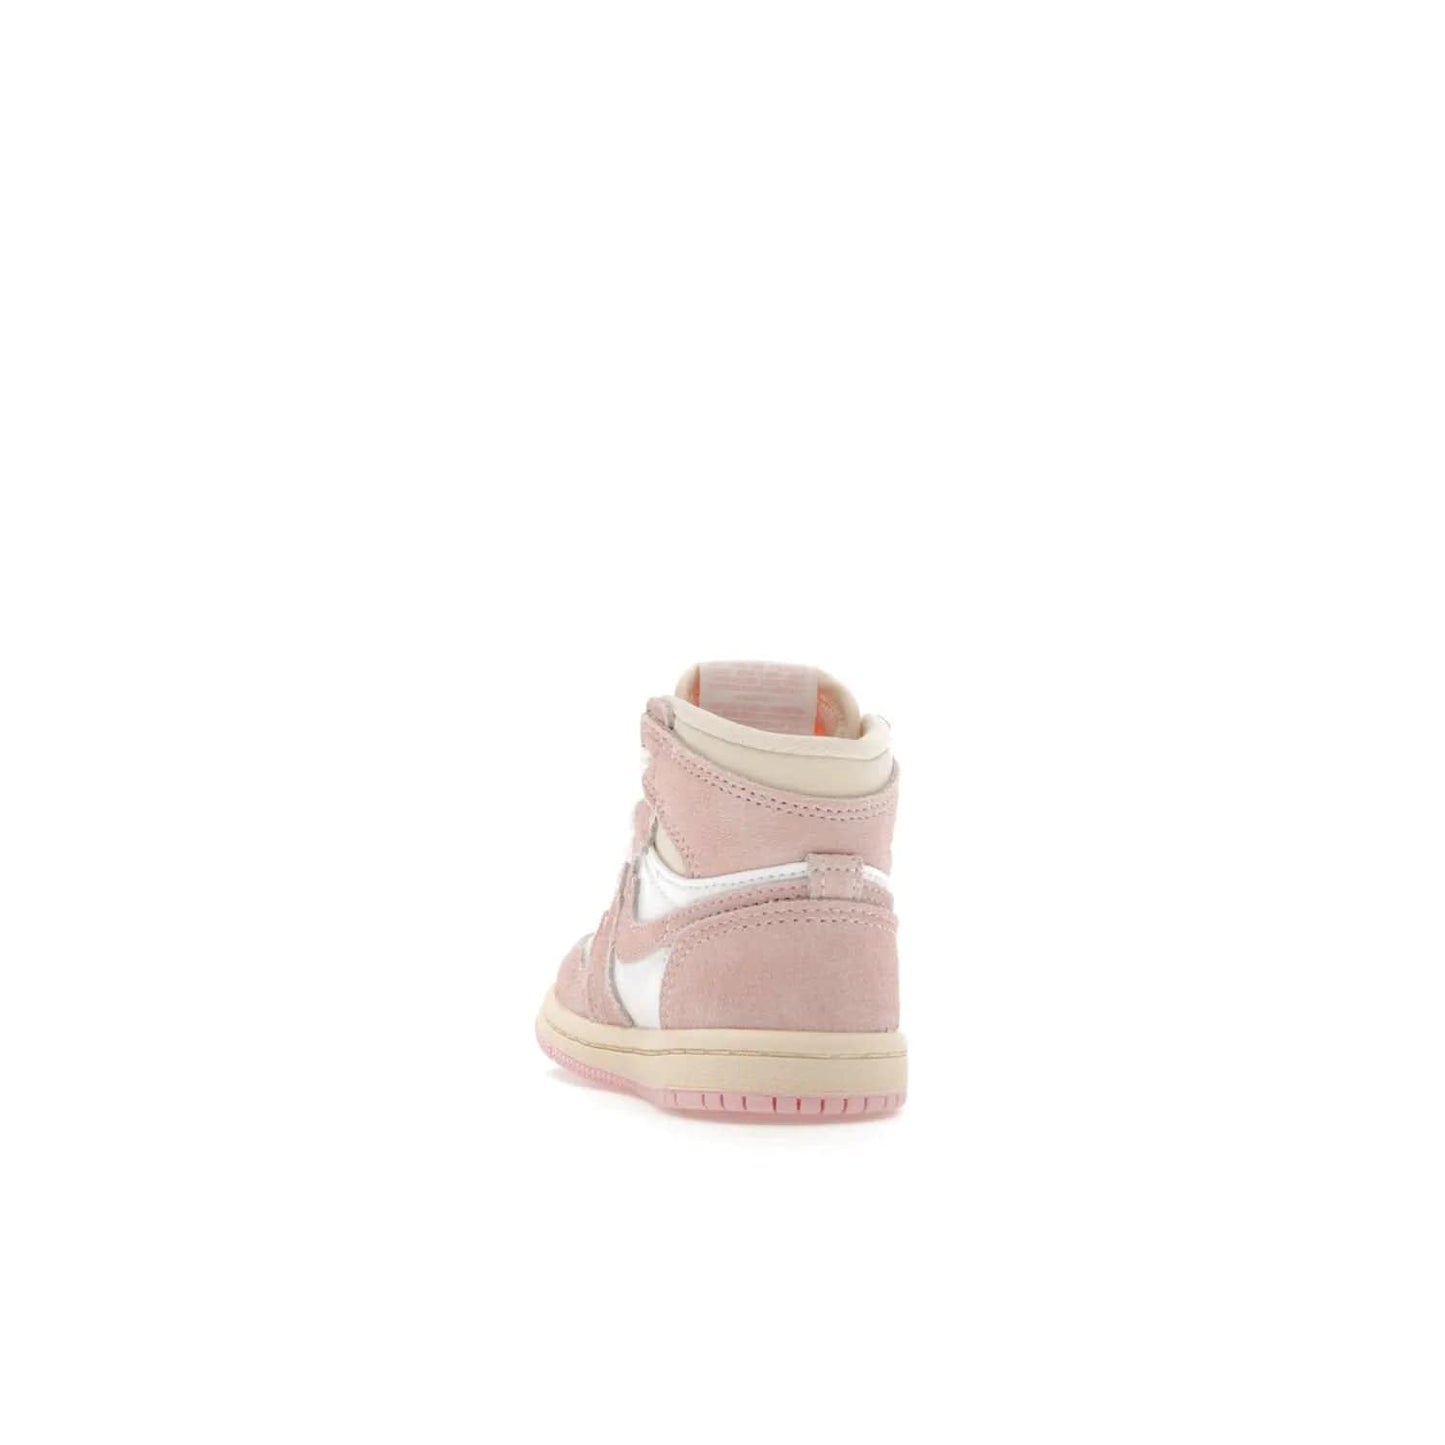 Jordan 1 Retro High OG Washed Pink (TD) - Image 26 - Only at www.BallersClubKickz.com - Retro style meets modern comfort: Introducing the Jordan 1 High OG Washed Pink (TD). Combining Atmosphere/White/Muslin/Sail colors with a high-rise silhouette, these shoes will be an instant classic when they release April 22, 2023.